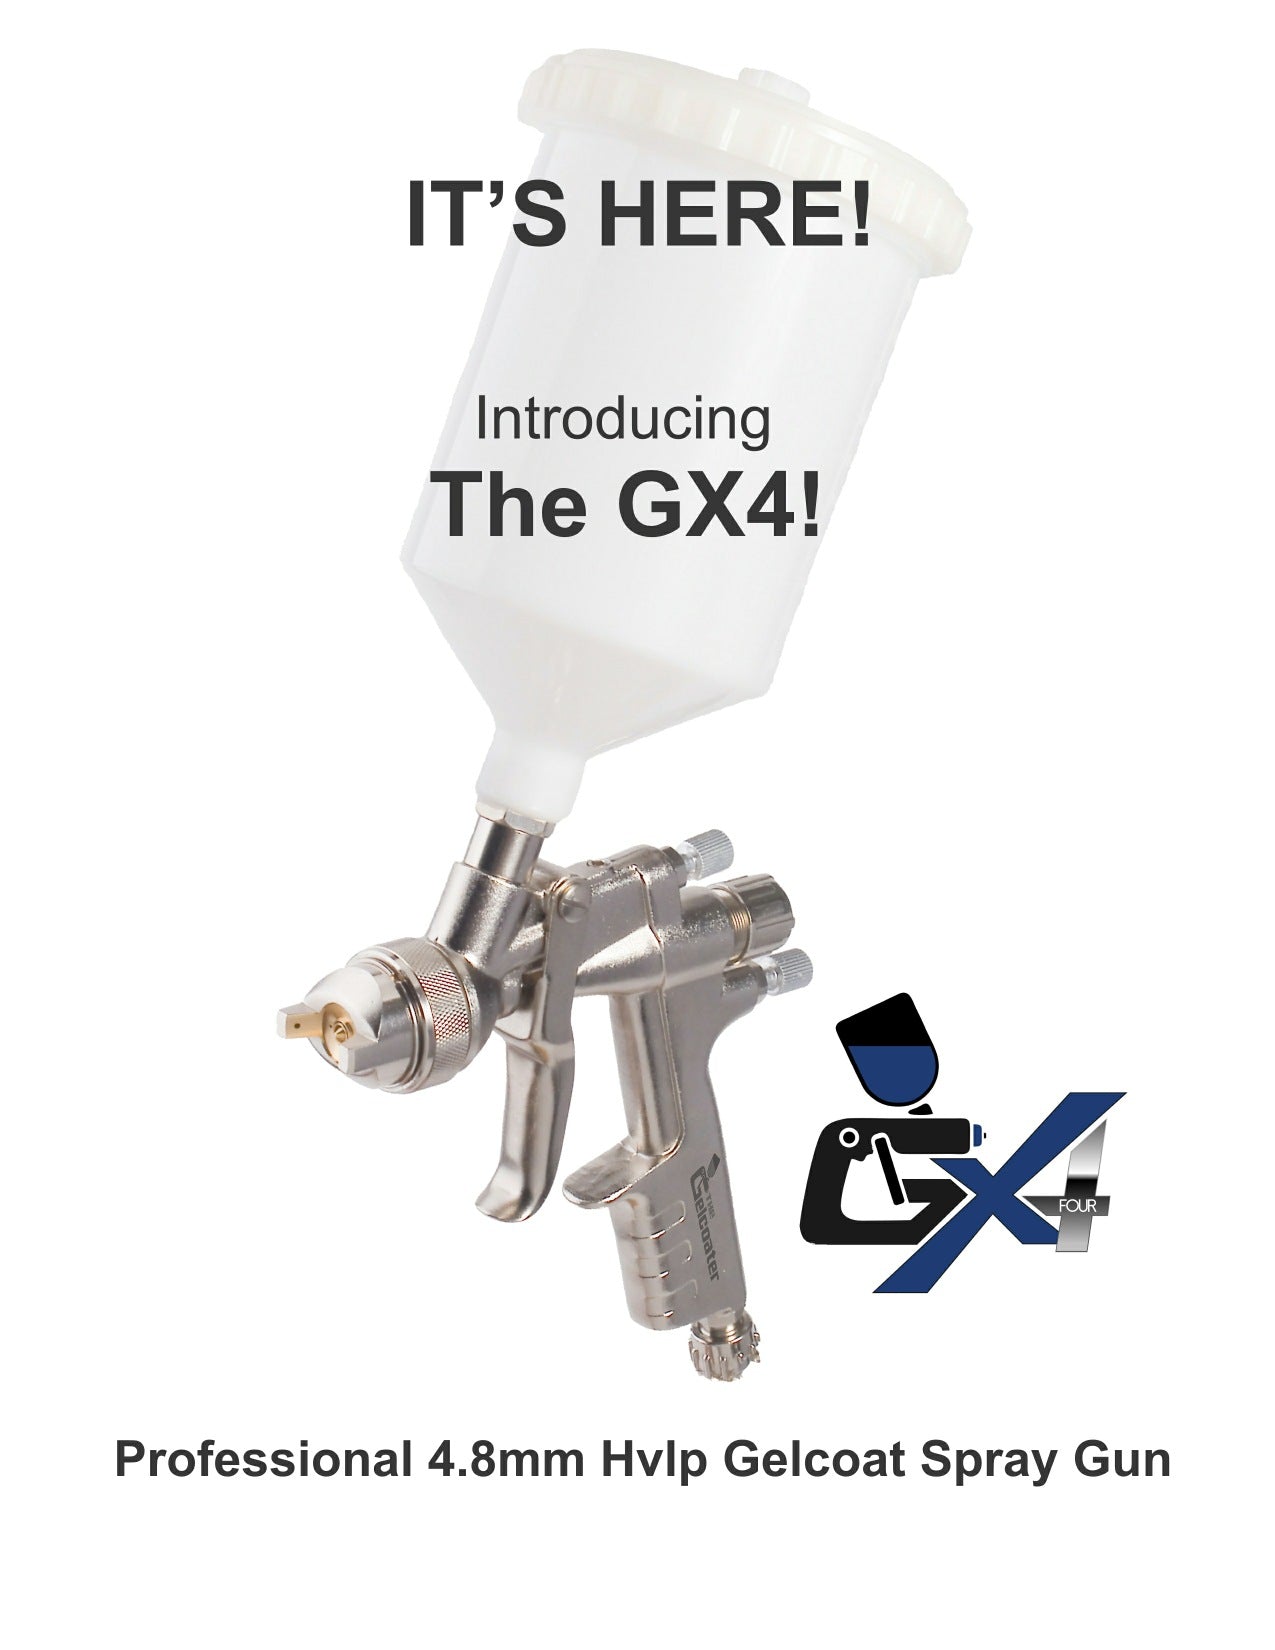 The GX4 HVLP Gelcoat and Resin Spray Gun with 4.8mm Nozzle